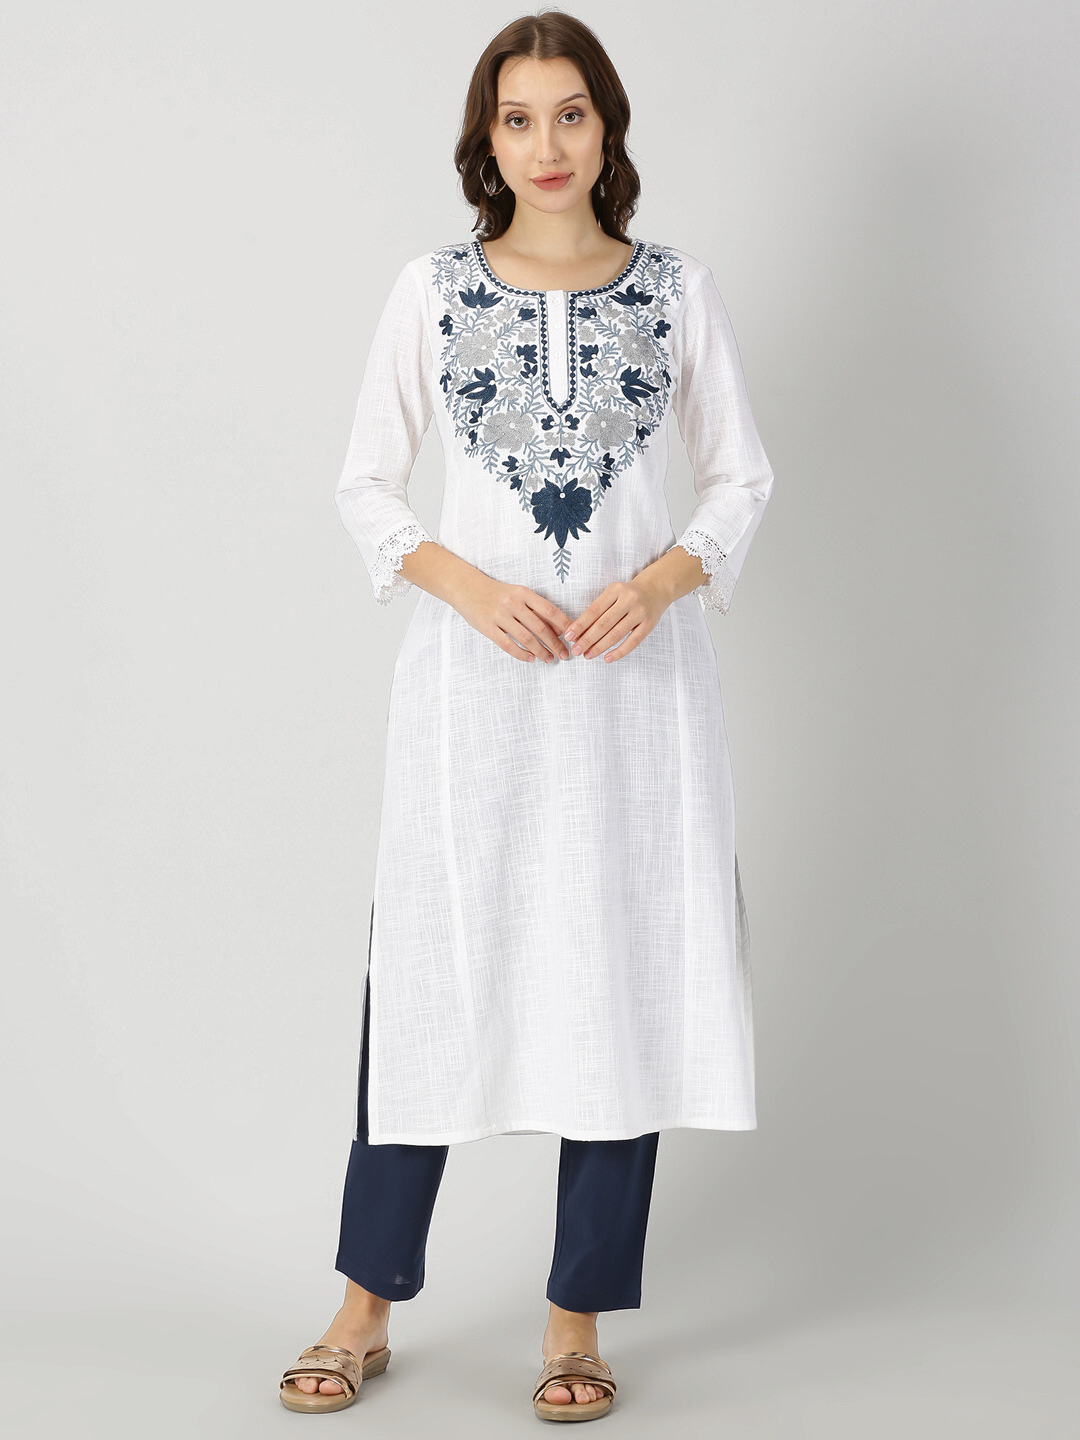 Trendy White Kurti Type Westurn Tops On Jeans, 60% OFF